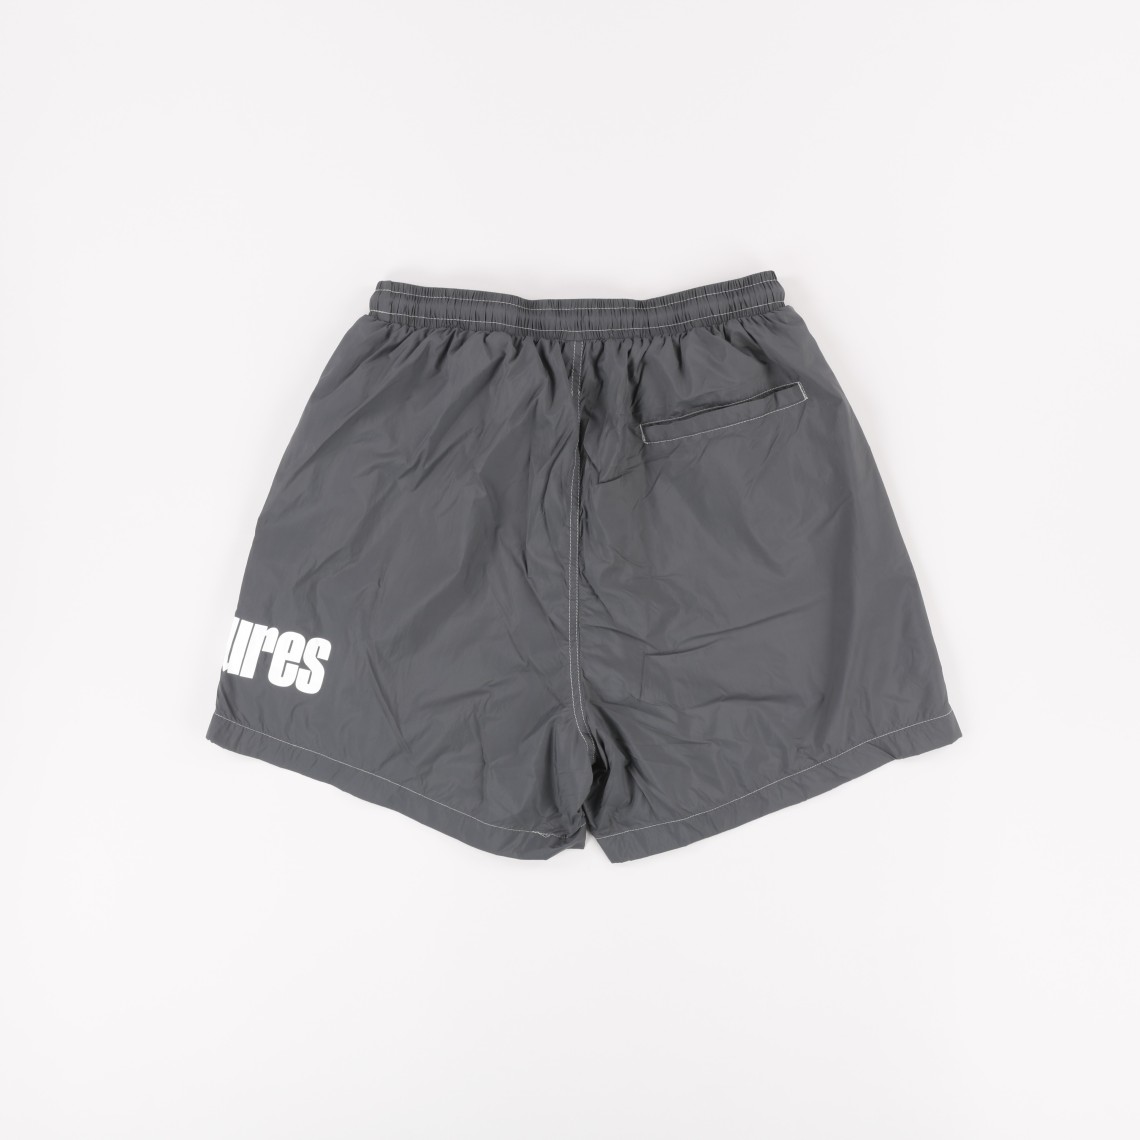 ELECTRIC ACTIVE SHORTS